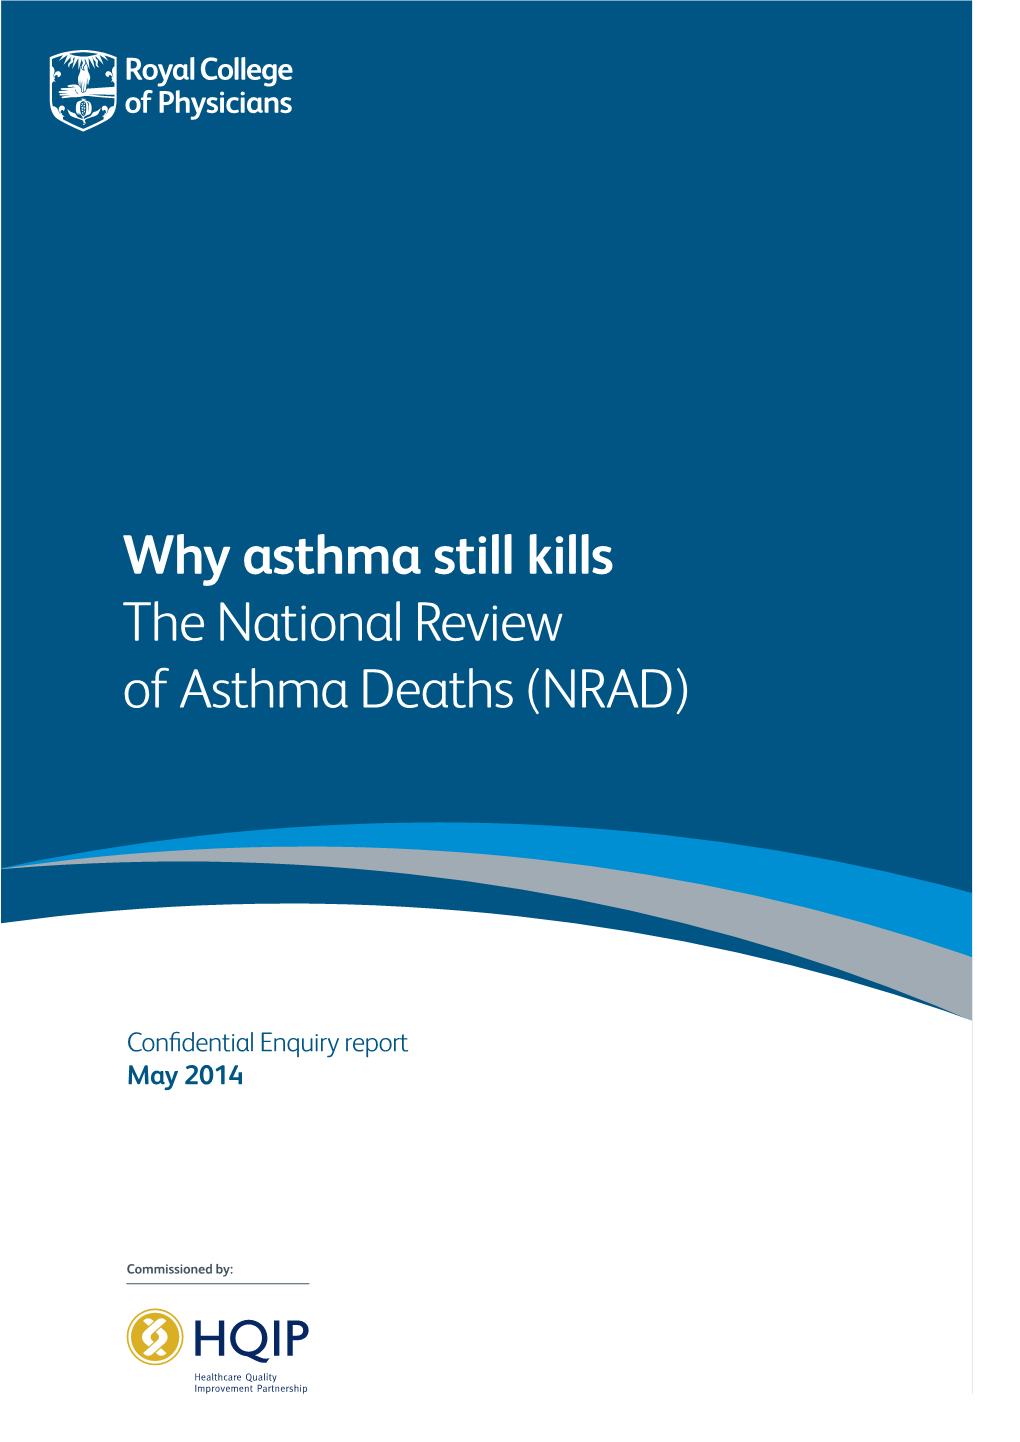 Why Asthma Still Kills the National Review of Asthma Deaths (NRAD)